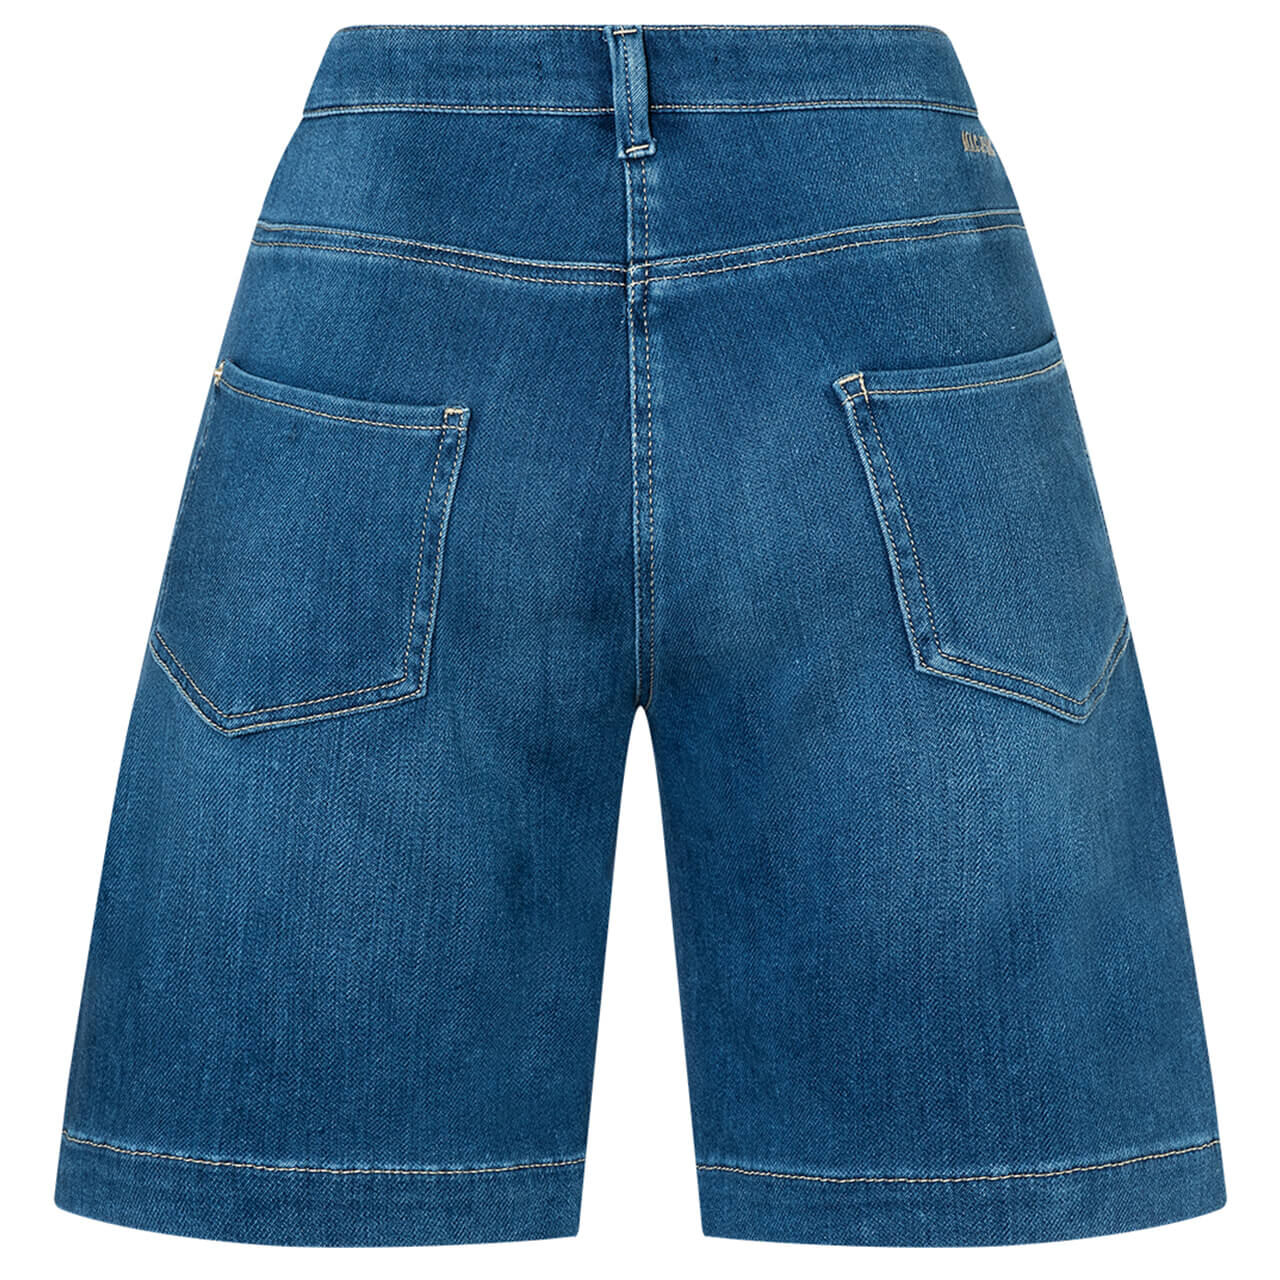 MAC Jogn Short Jeans Shorts mid blue cool washed